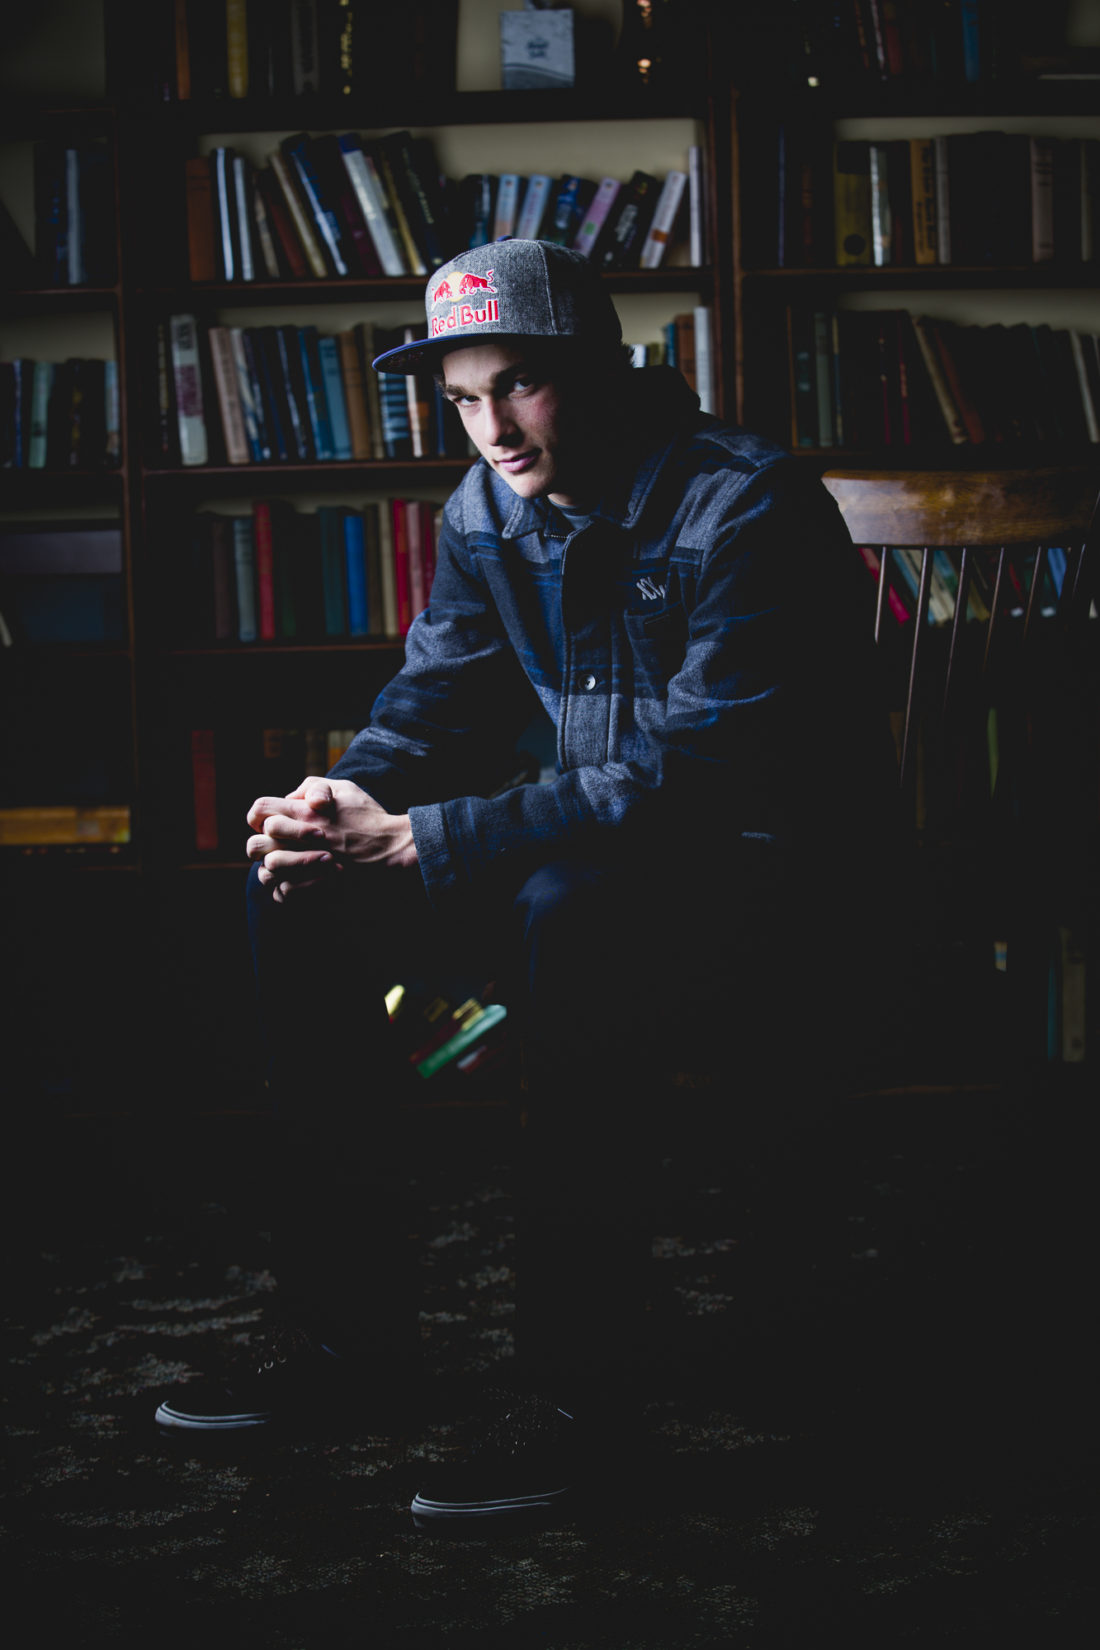 Olympic Bronze Medalist Nick Goepper, photographed for Freeskier Magazine